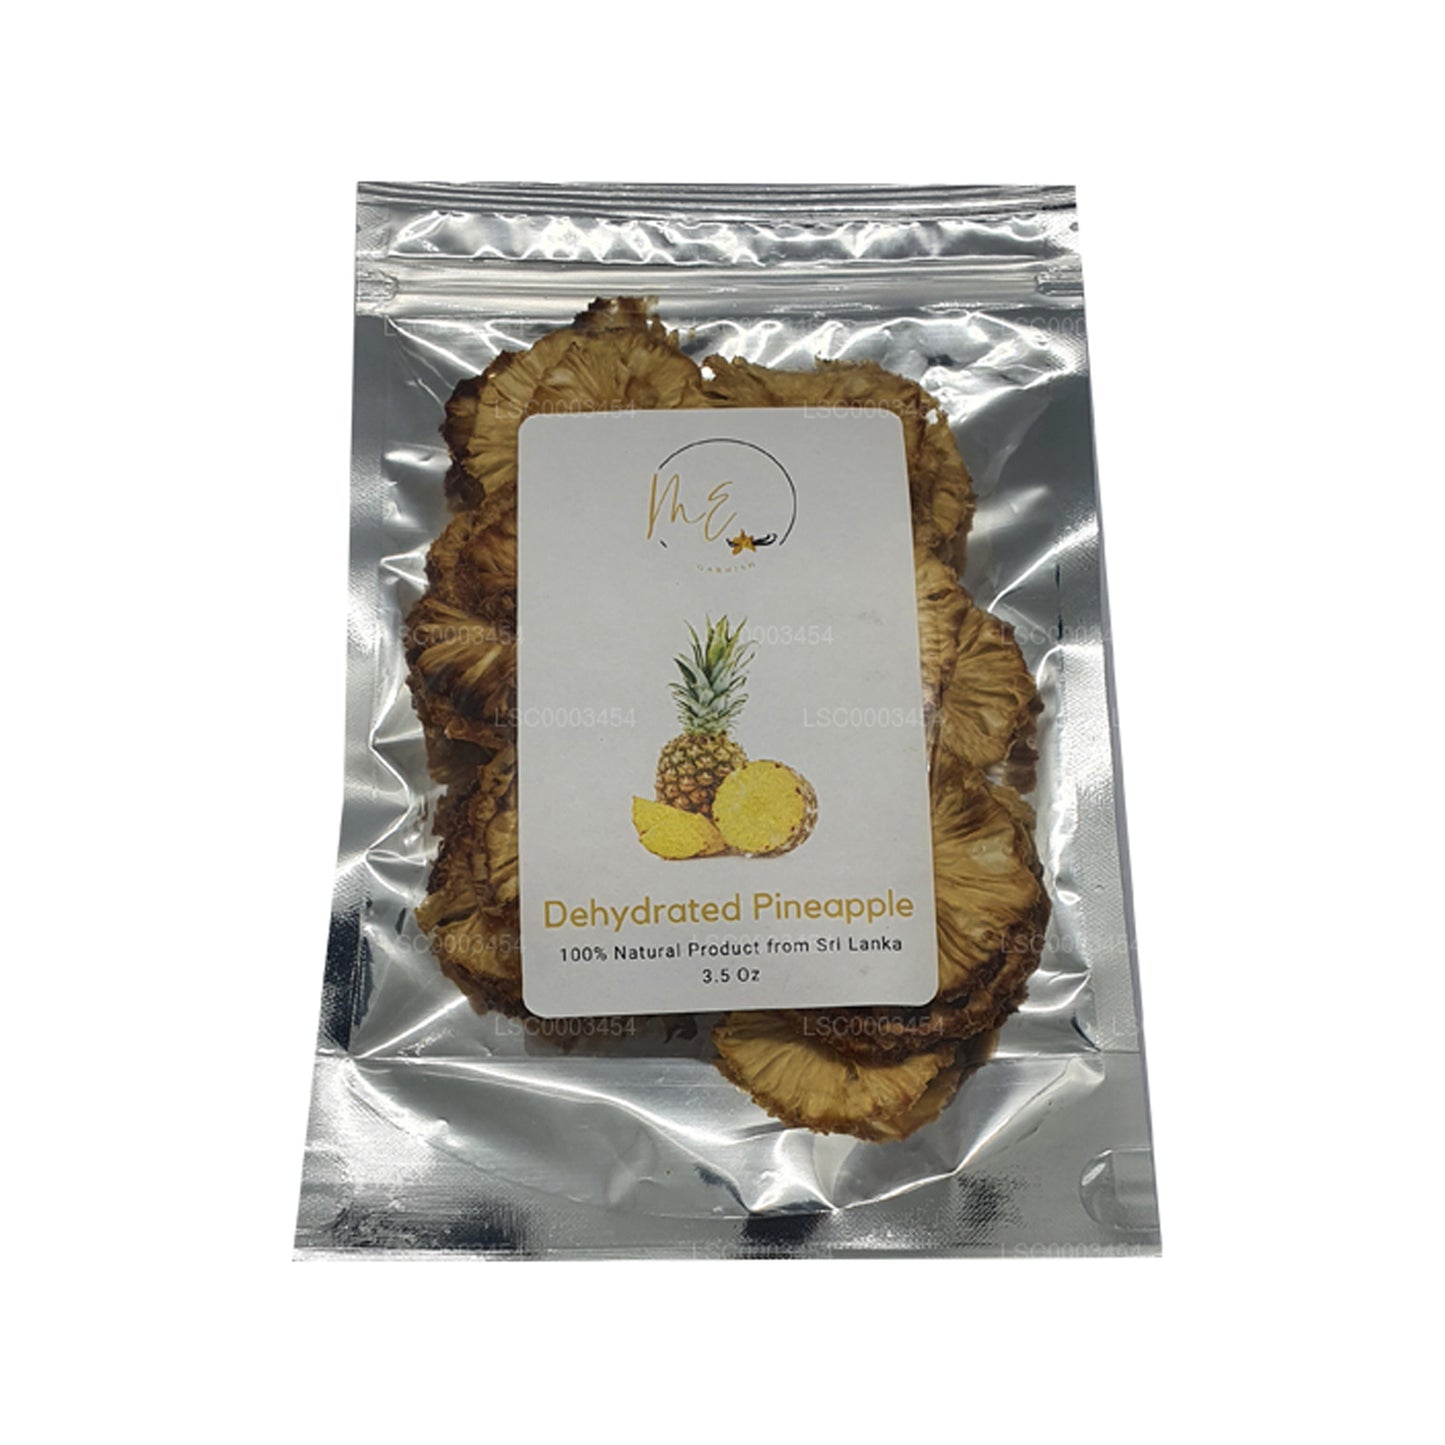 ME Dehydrated Pineapple (100g)